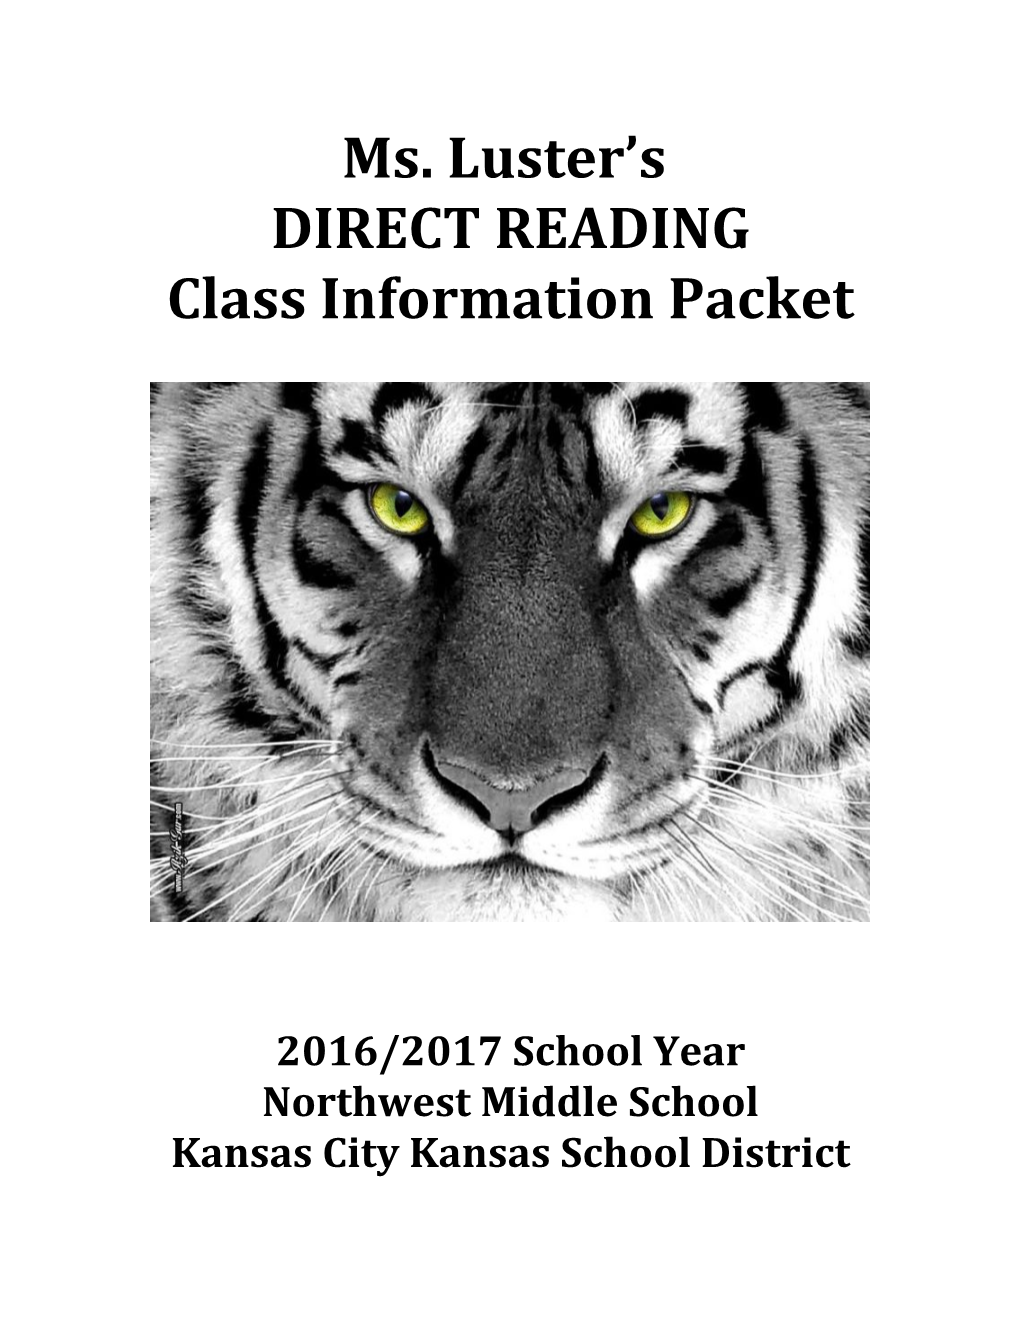 Class Information Packet